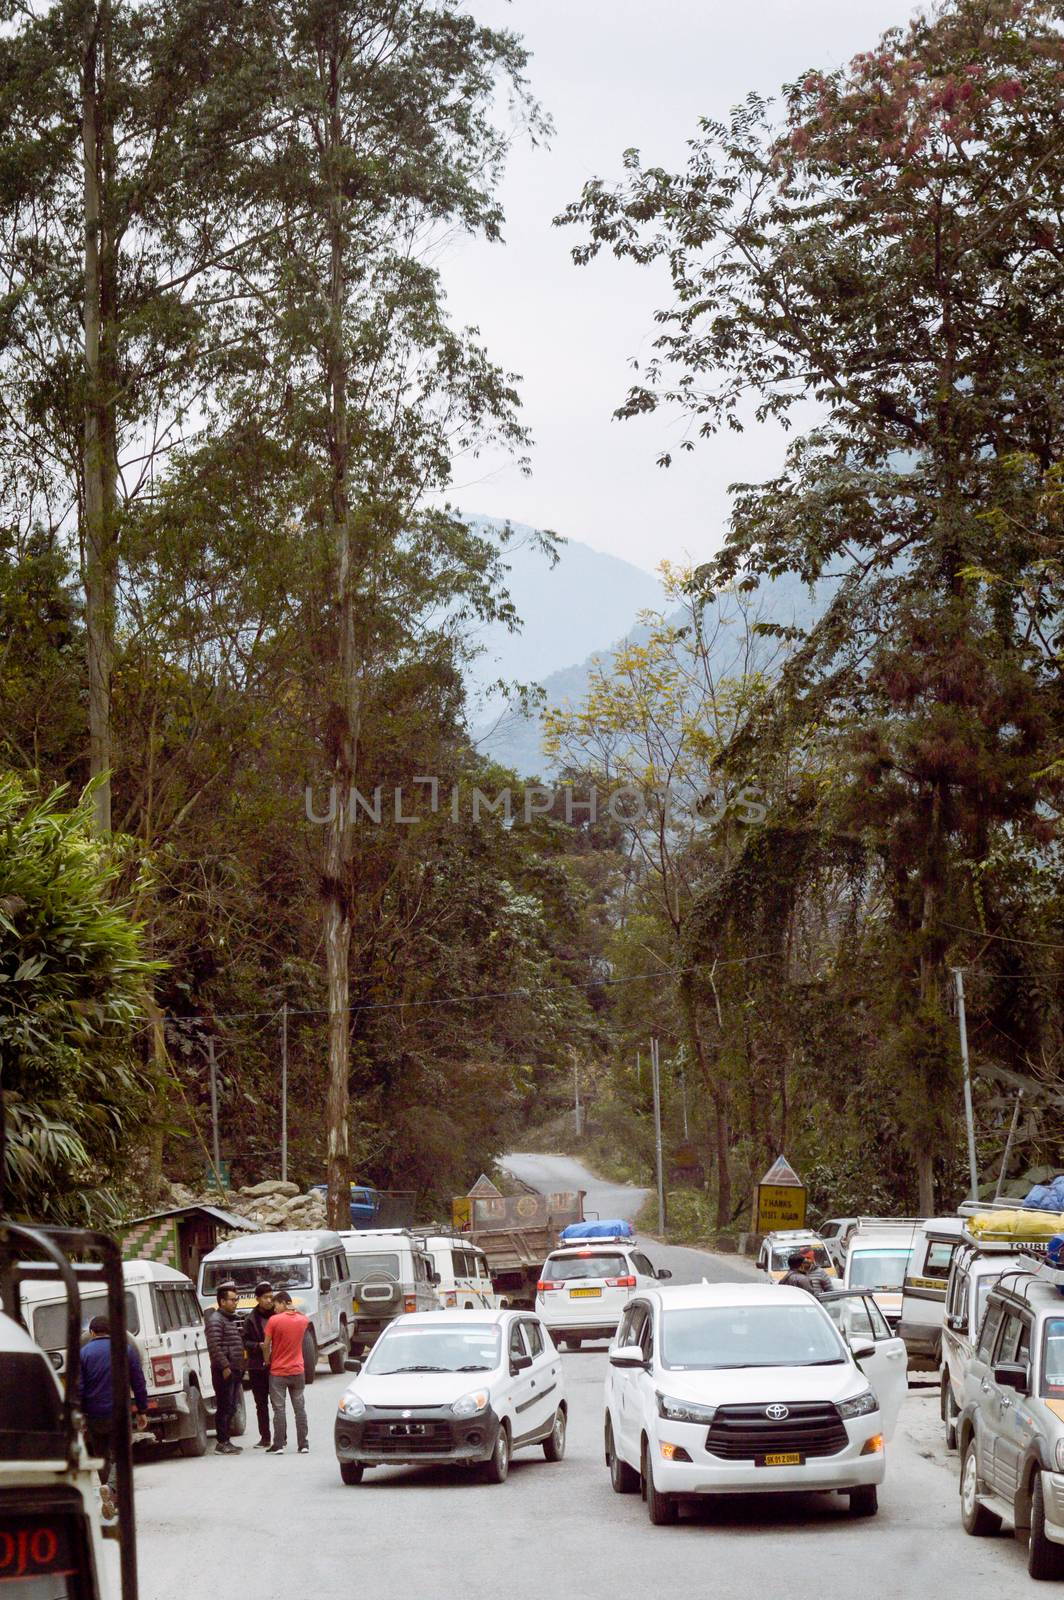 Siliguri West Bengal India October 2018 - View of a popular tourist halt on travel from Malbazar to Gangtok on the route of NH31, NH10 Gangtok Ranpoo road from Junction of Siliguri to Matigara. by sudiptabhowmick